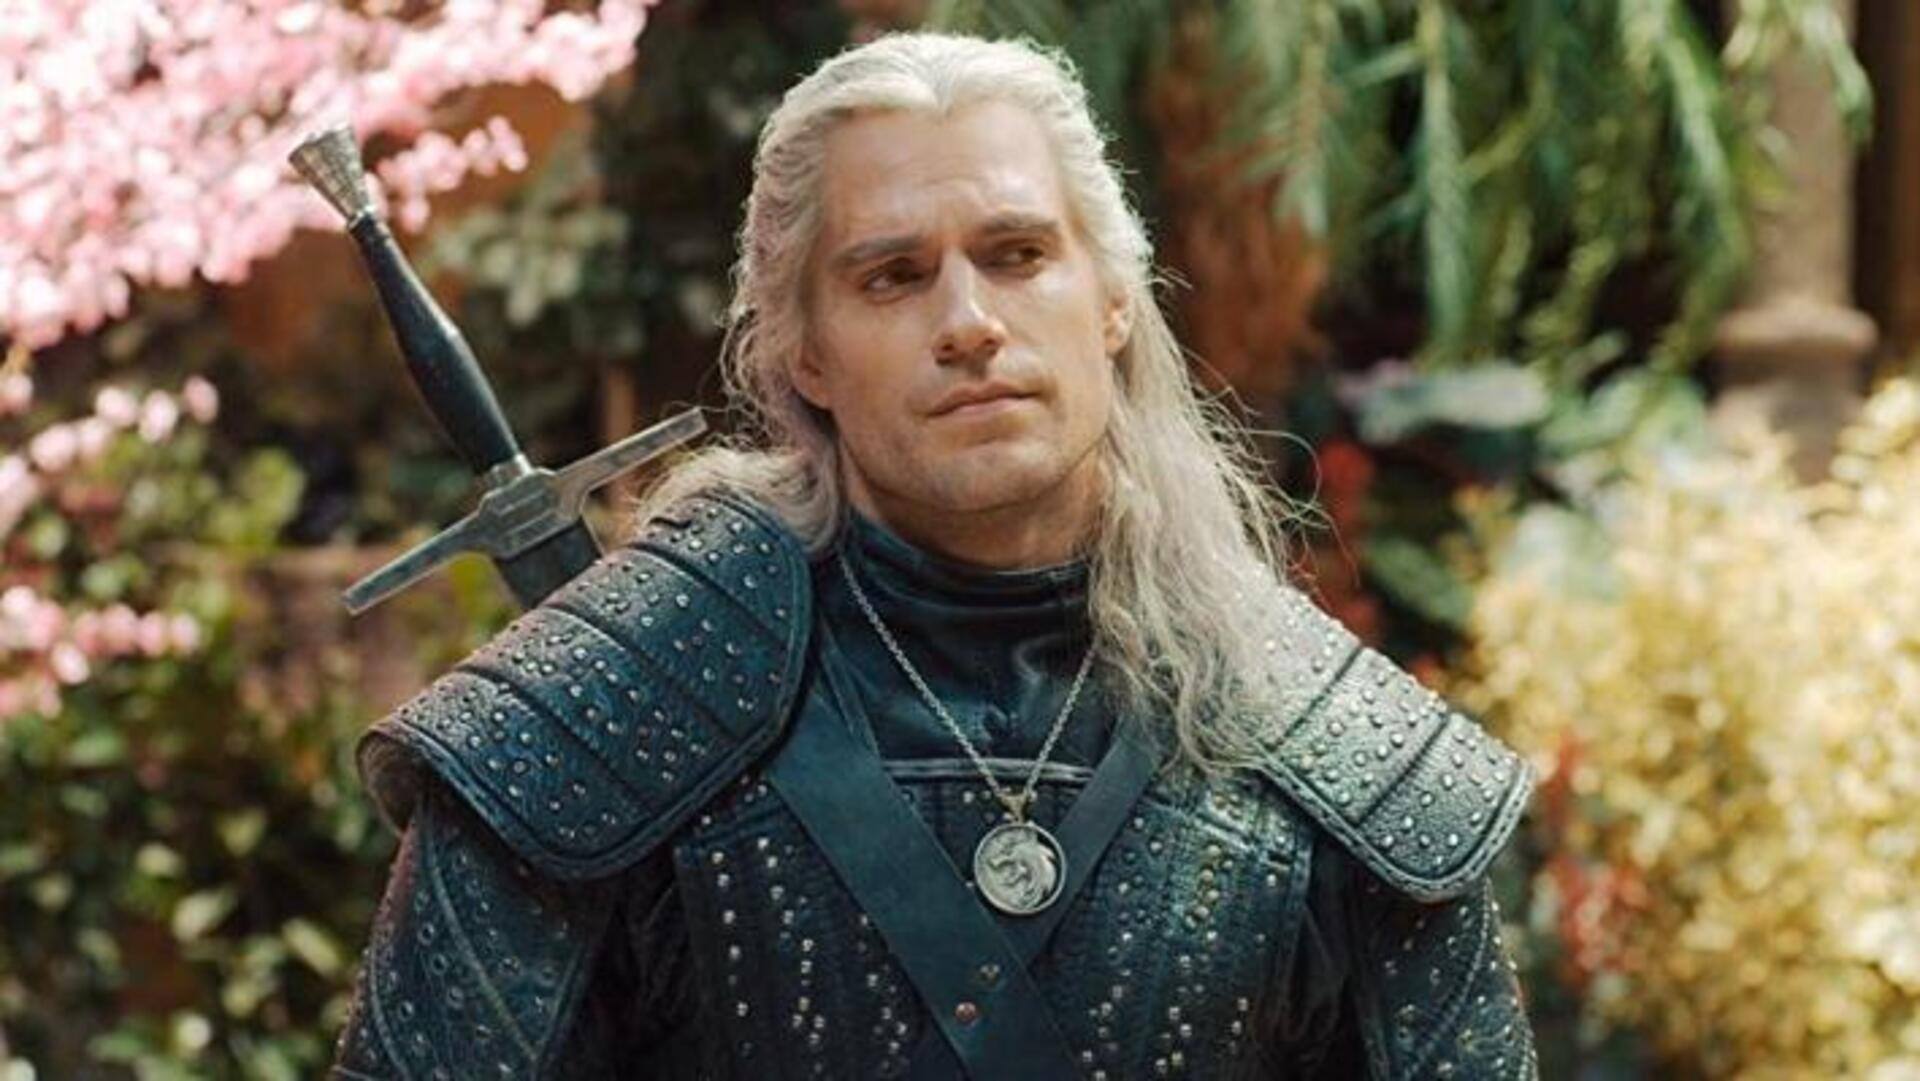 'The Witcher' to 'Good Omens': Best fantasy shows of 2023